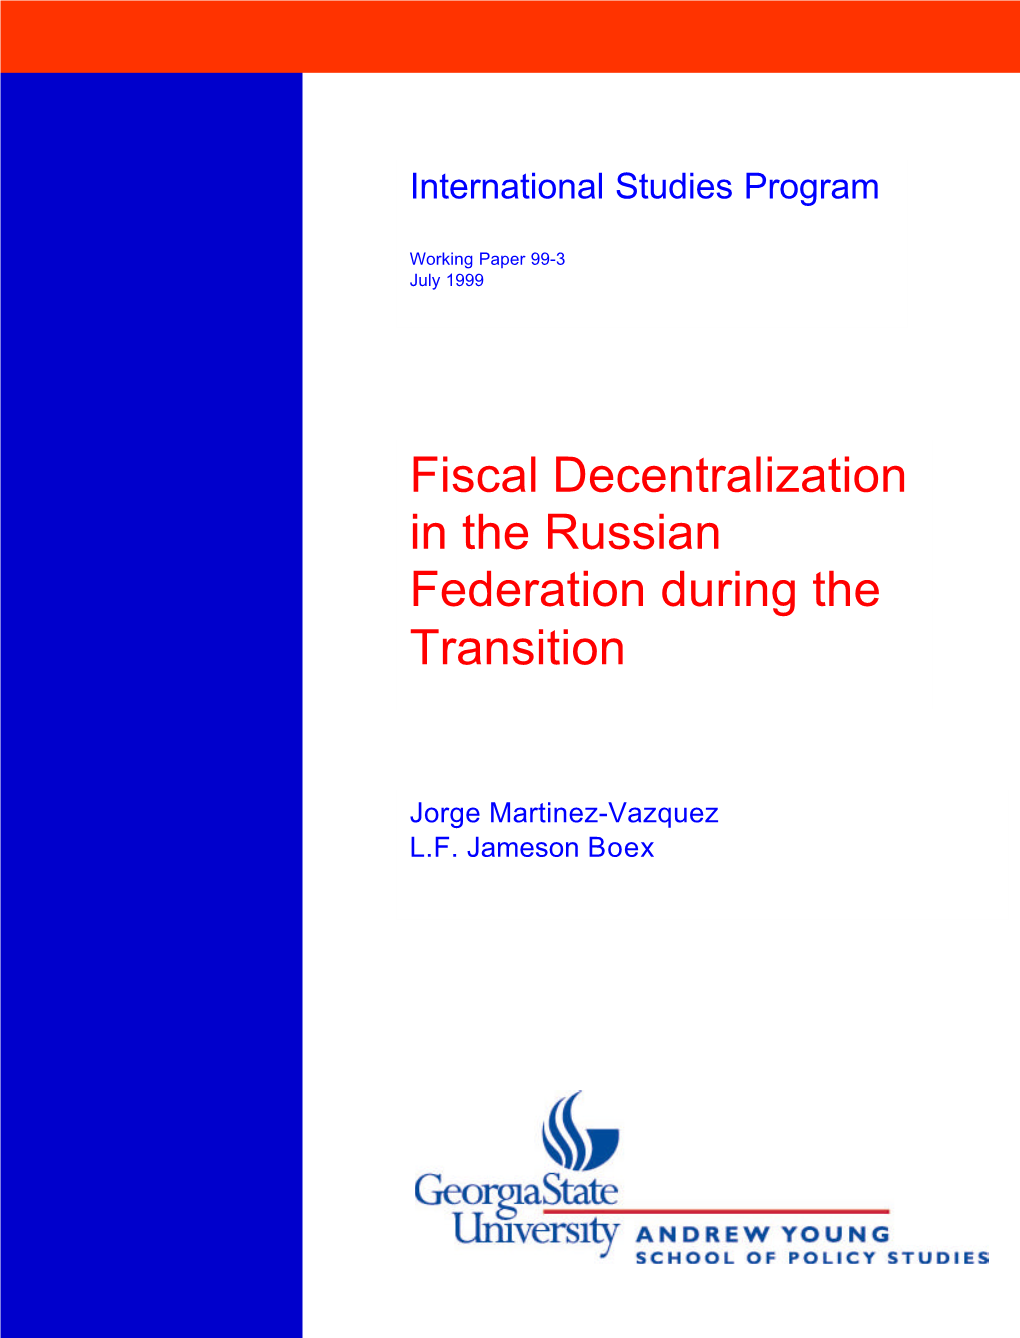 Fiscal Decentralization in the Russian Federation During the Transition